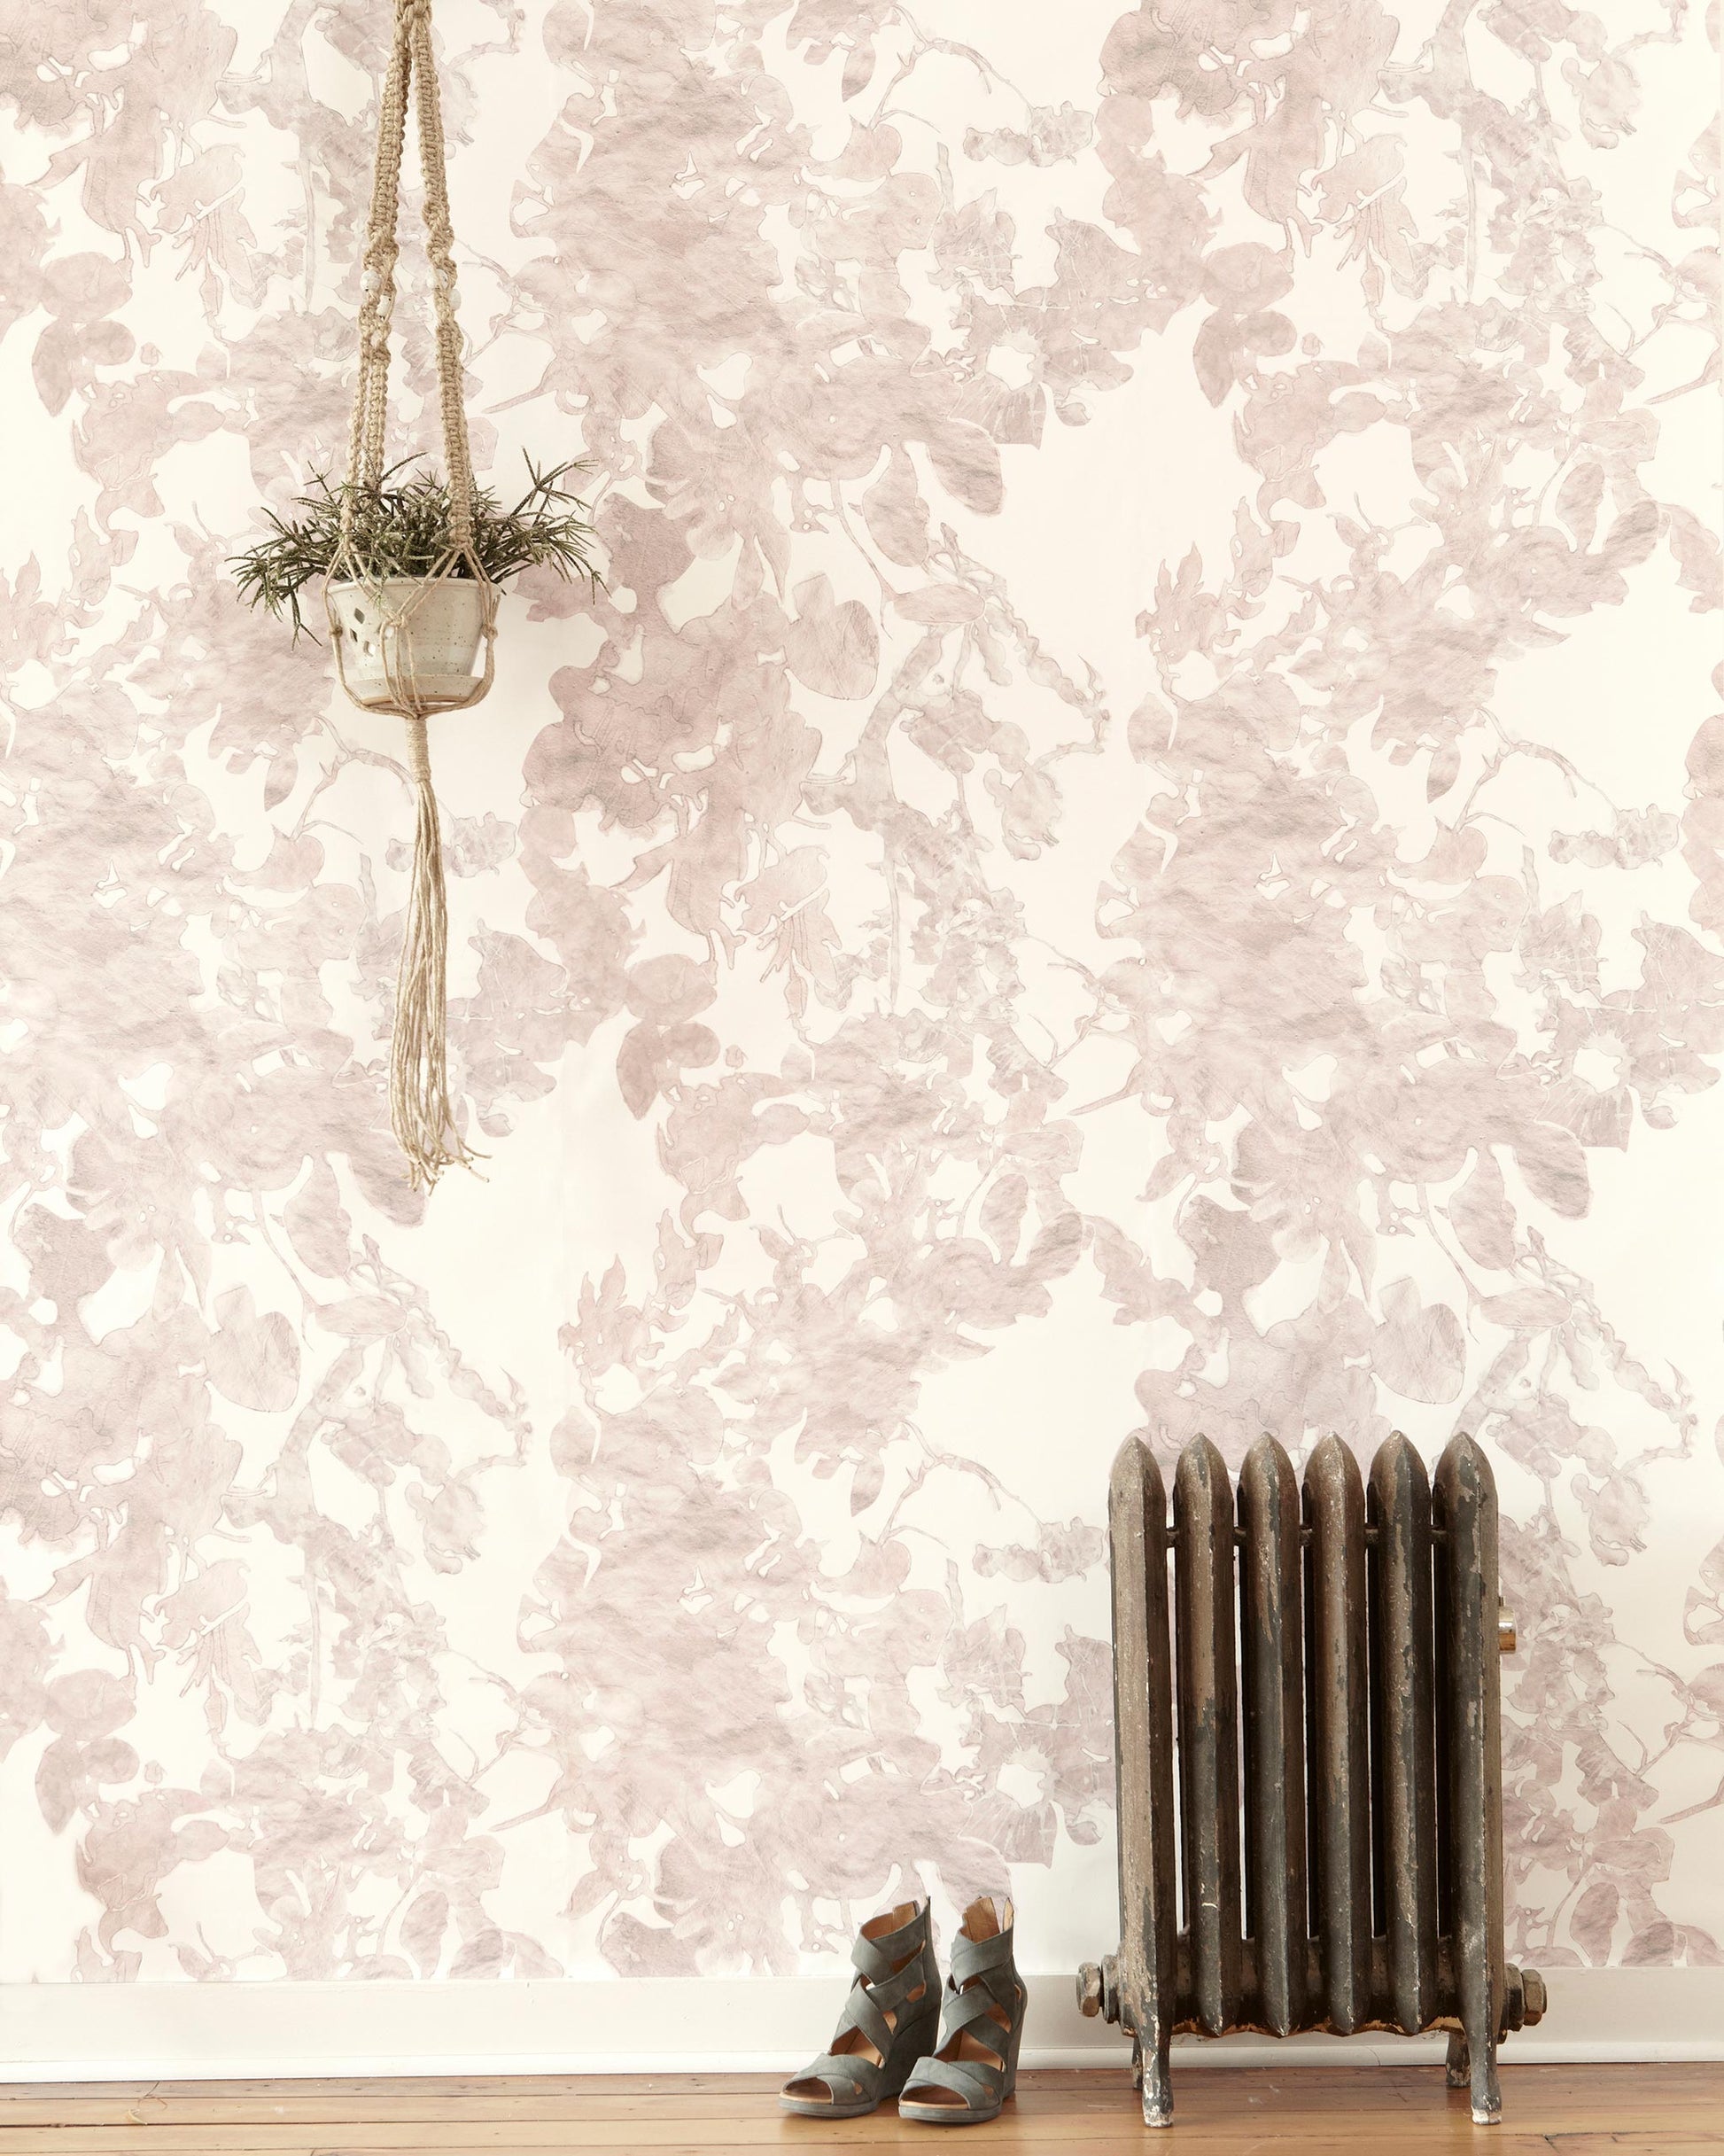 A room with Up For Anything Wallpaper Glimmer on the walls and a radiator